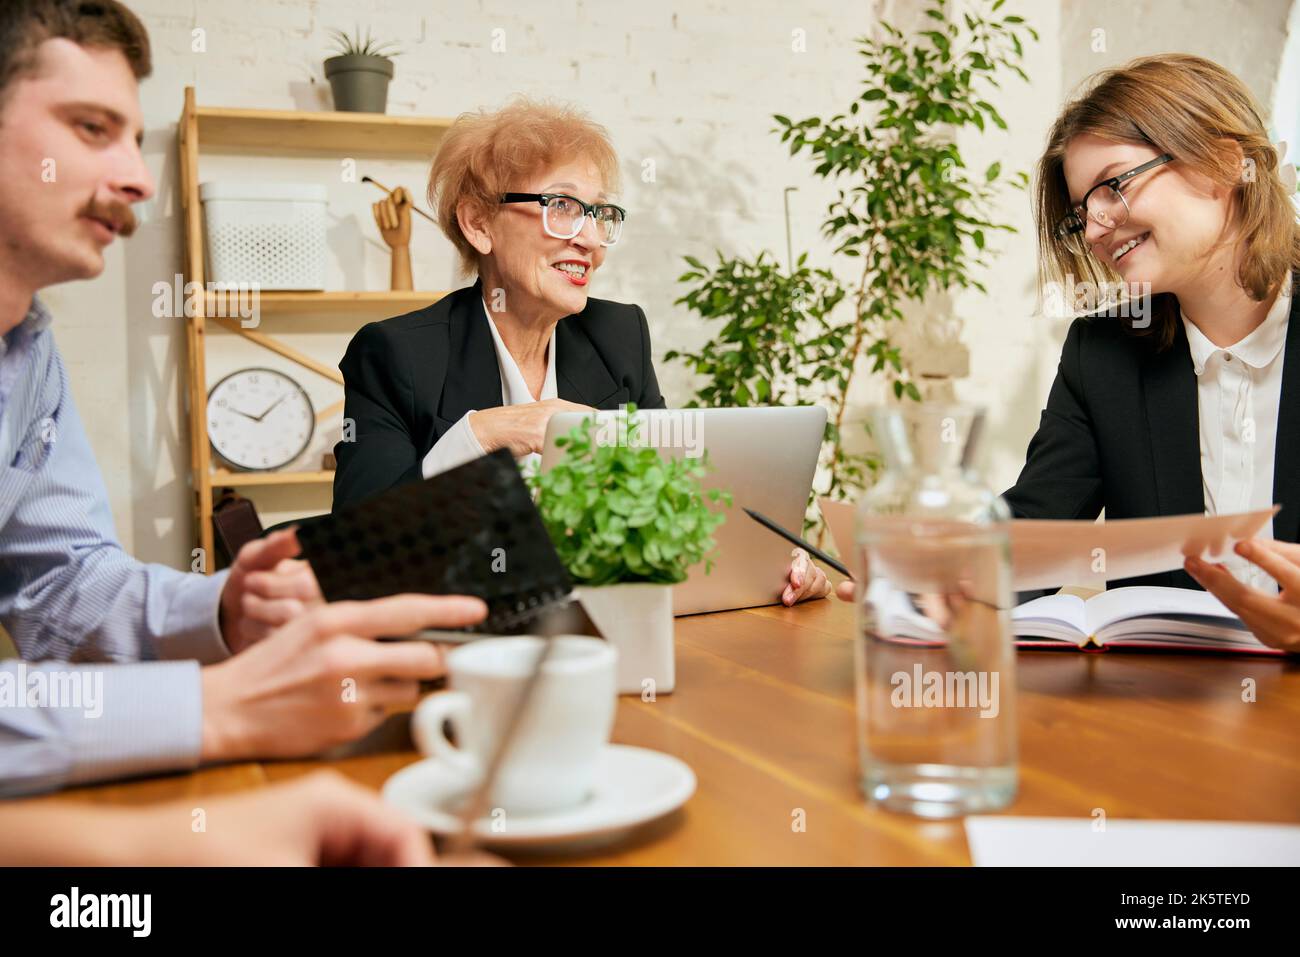 Friendly atmosphere at business gathering. Mixed ages people talking, working with colleagues at loft style office space, indoors. Stock Photo